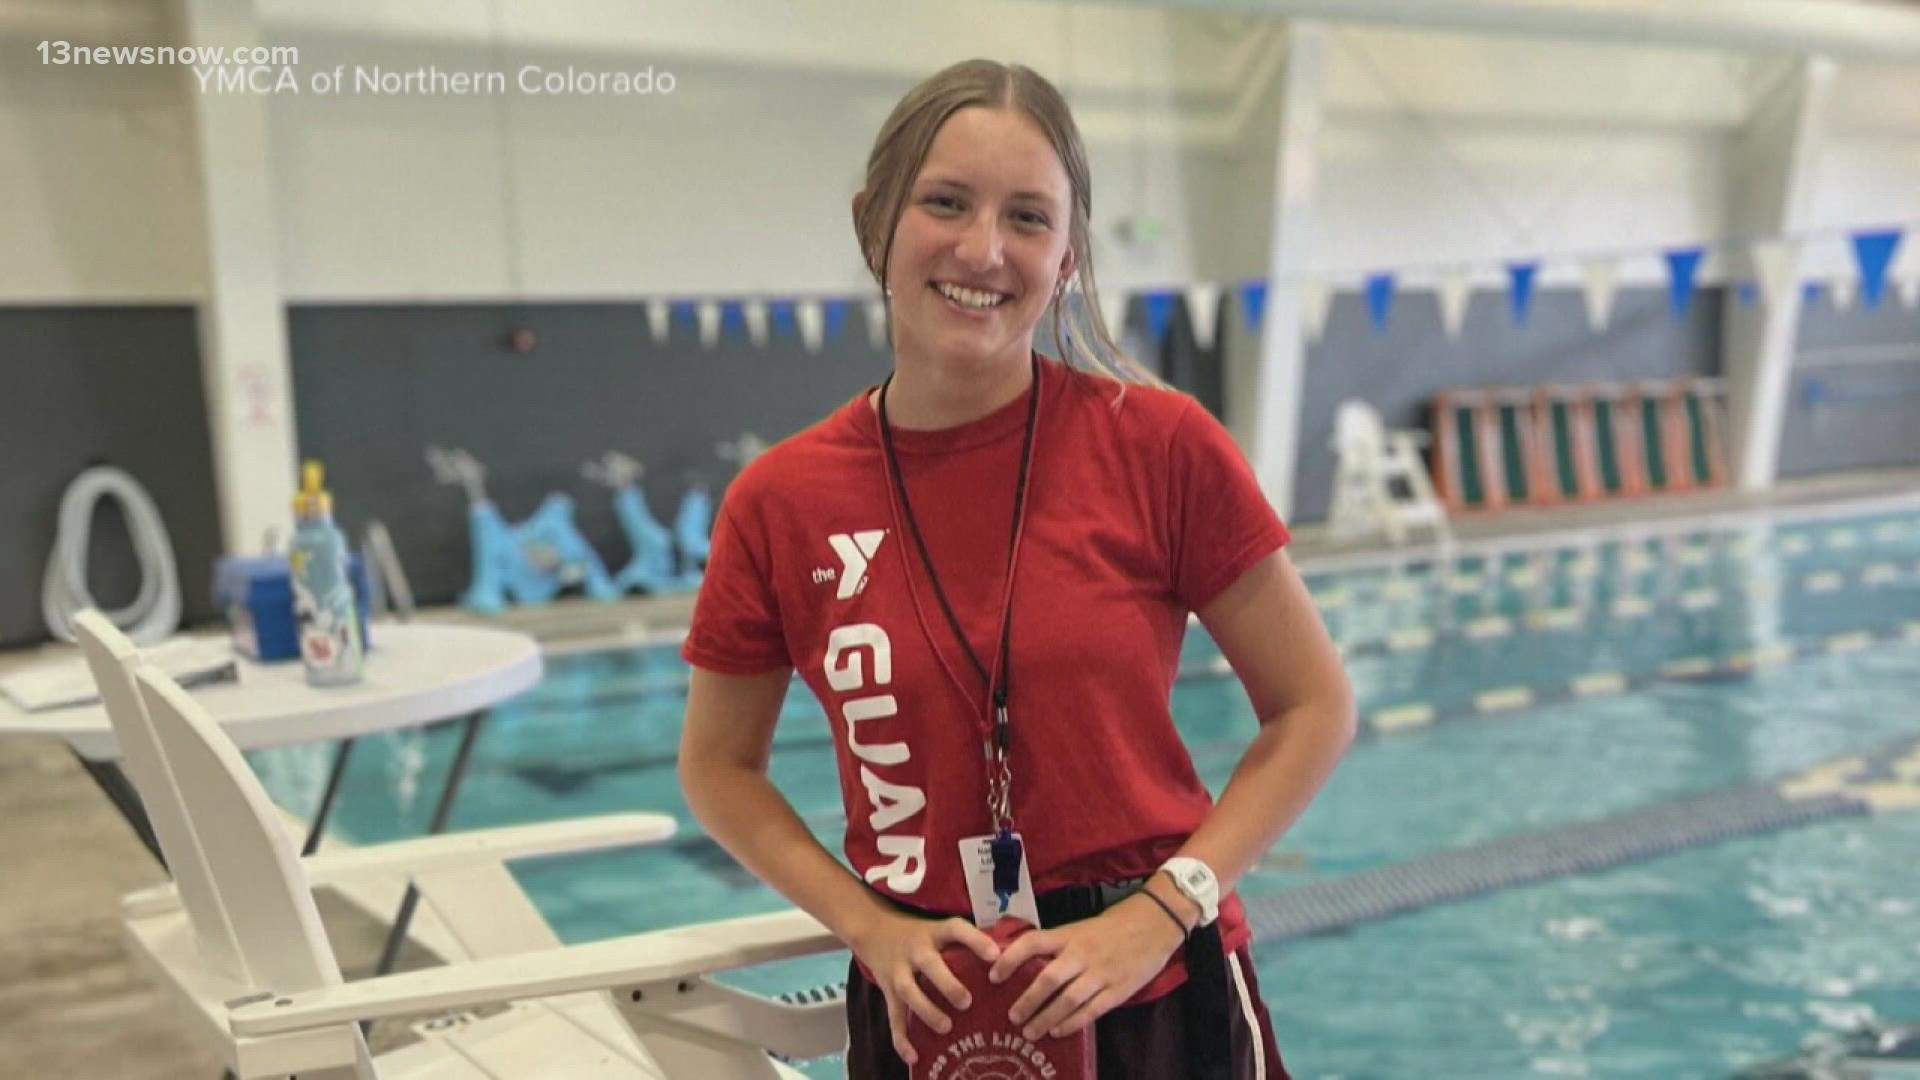 A normal shift at a normal summer job for a Colorado teen turned into anything but, after she helped deliver a baby while at work.